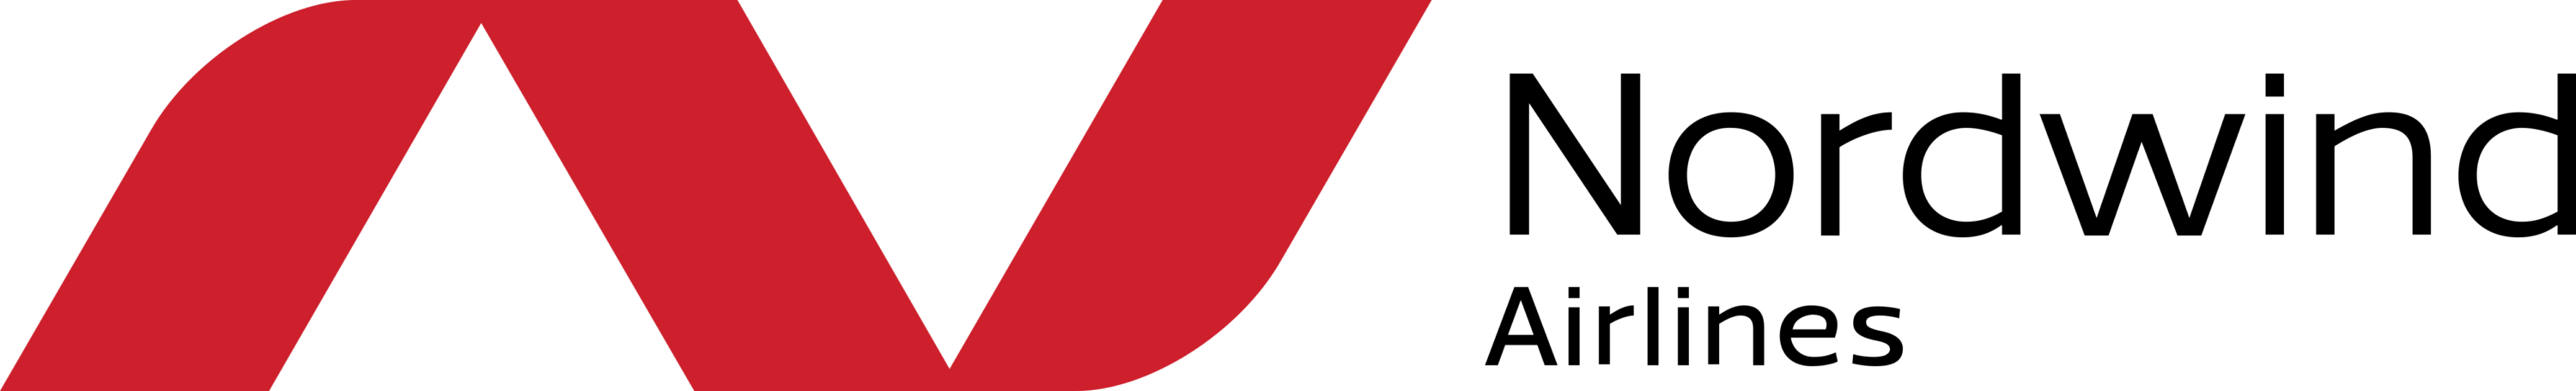 Nordwind Airlines Logo